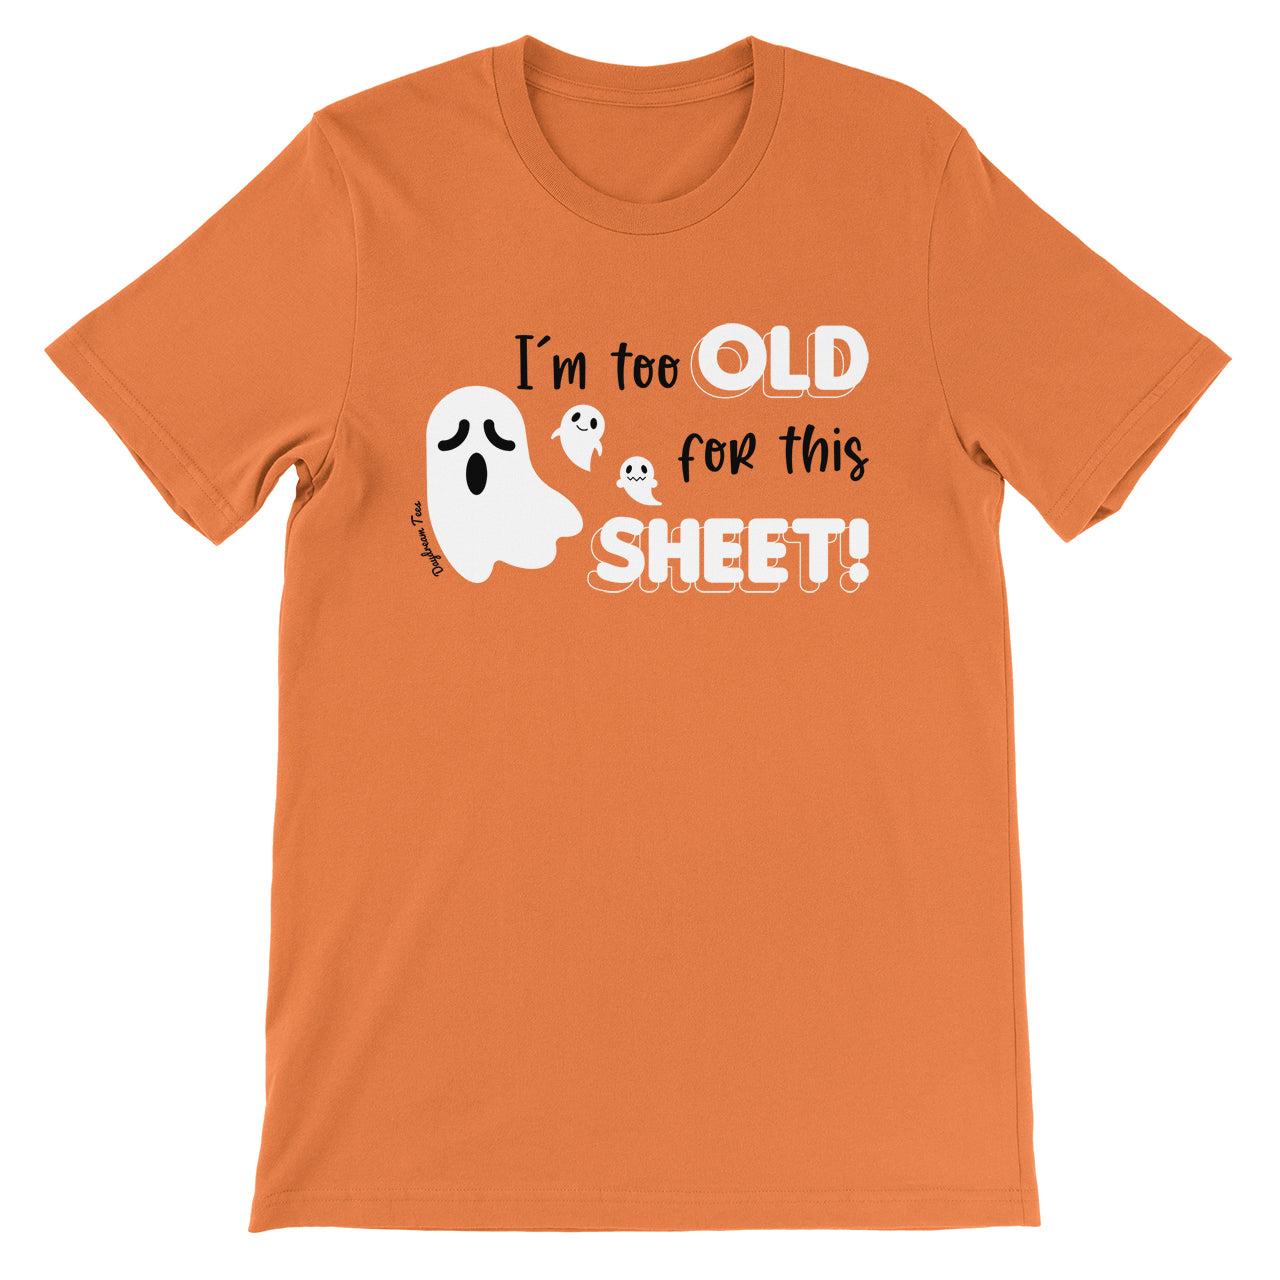 Daydream Tees I'm Too Old for this Sheet